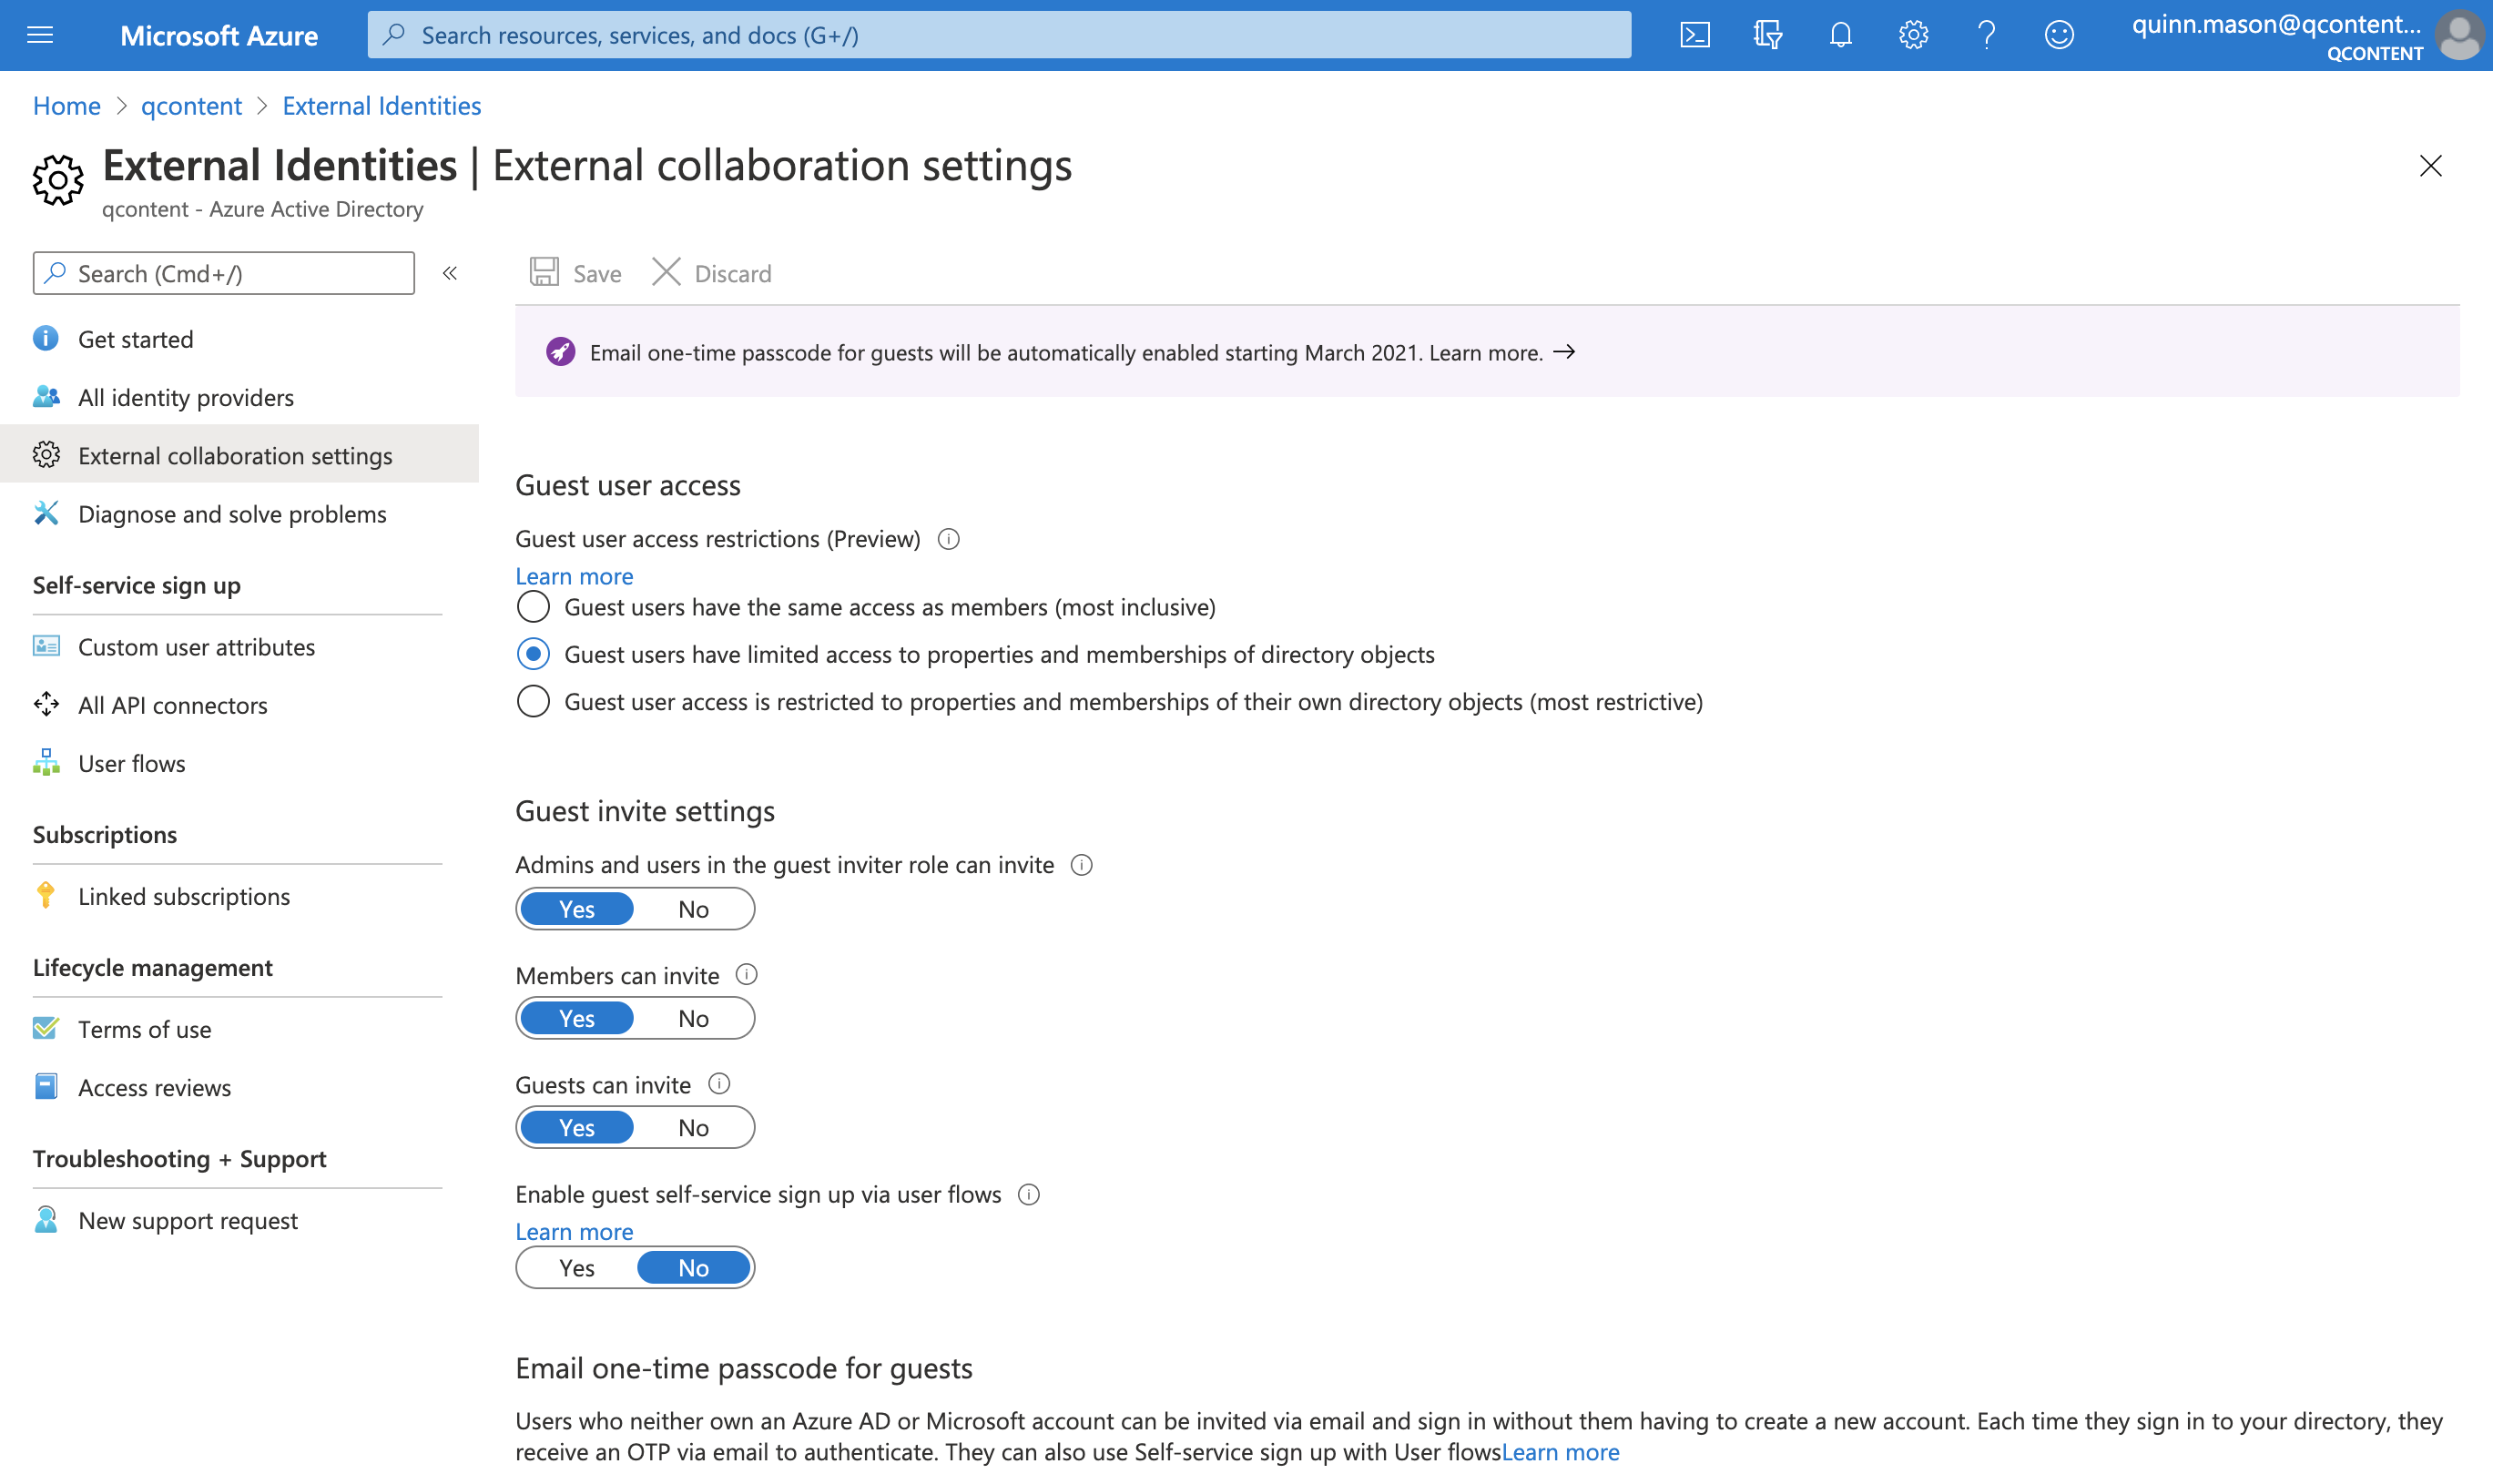 Screenshot of External collaboration settings in Azure AD.